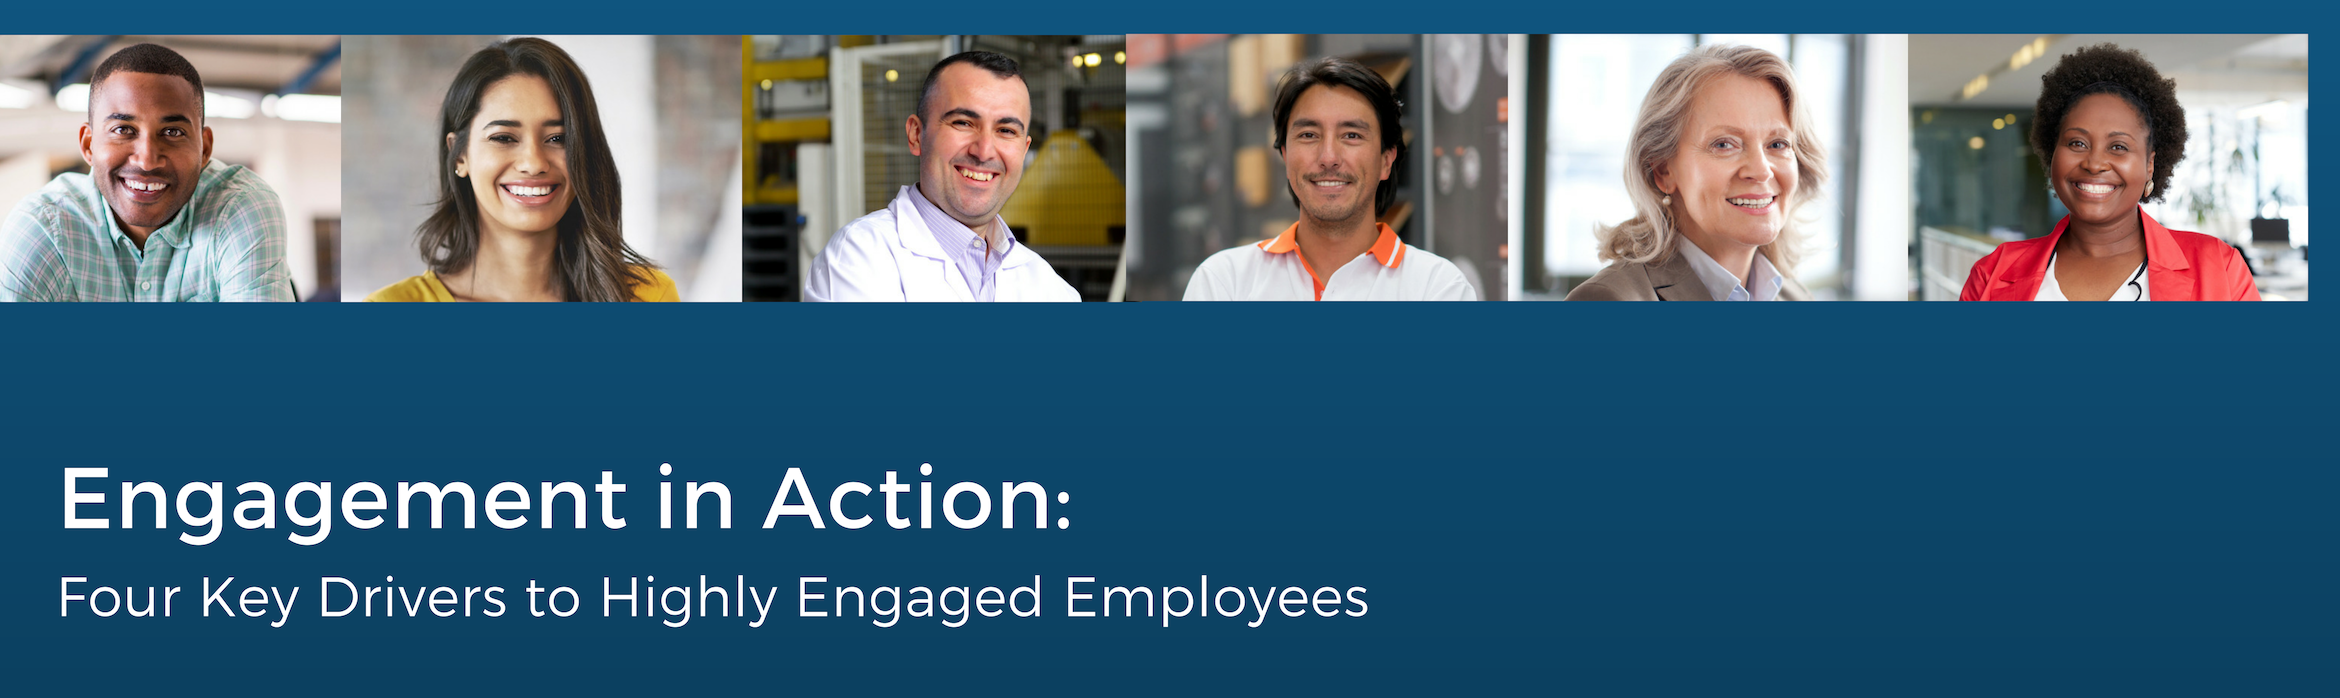 Engagement in Action: Four Key Drivers to Highly Engaged Employees